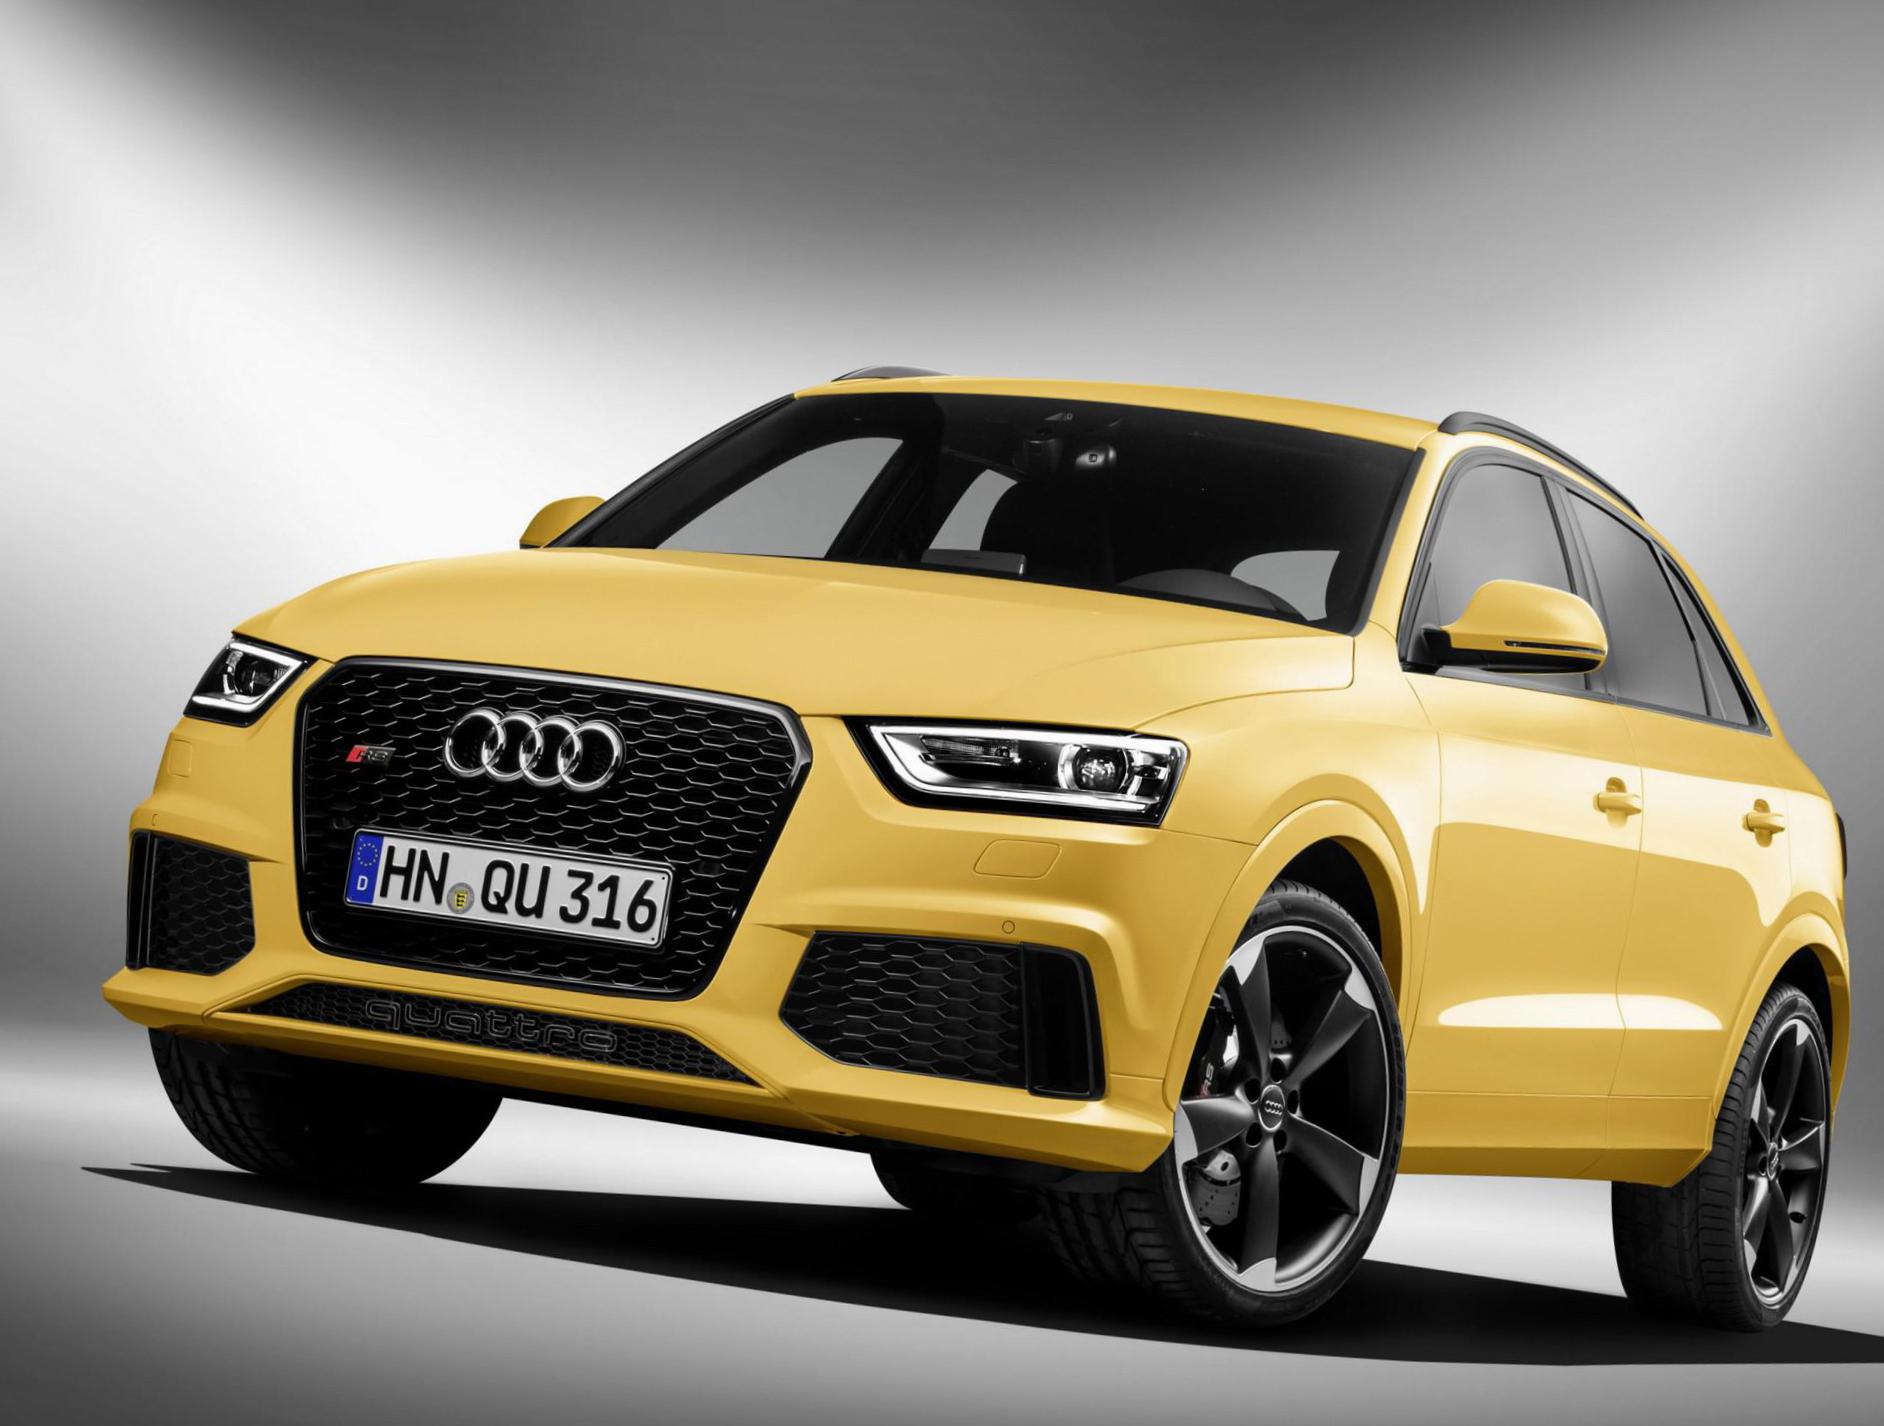 RS Q3 Audi approved 2013